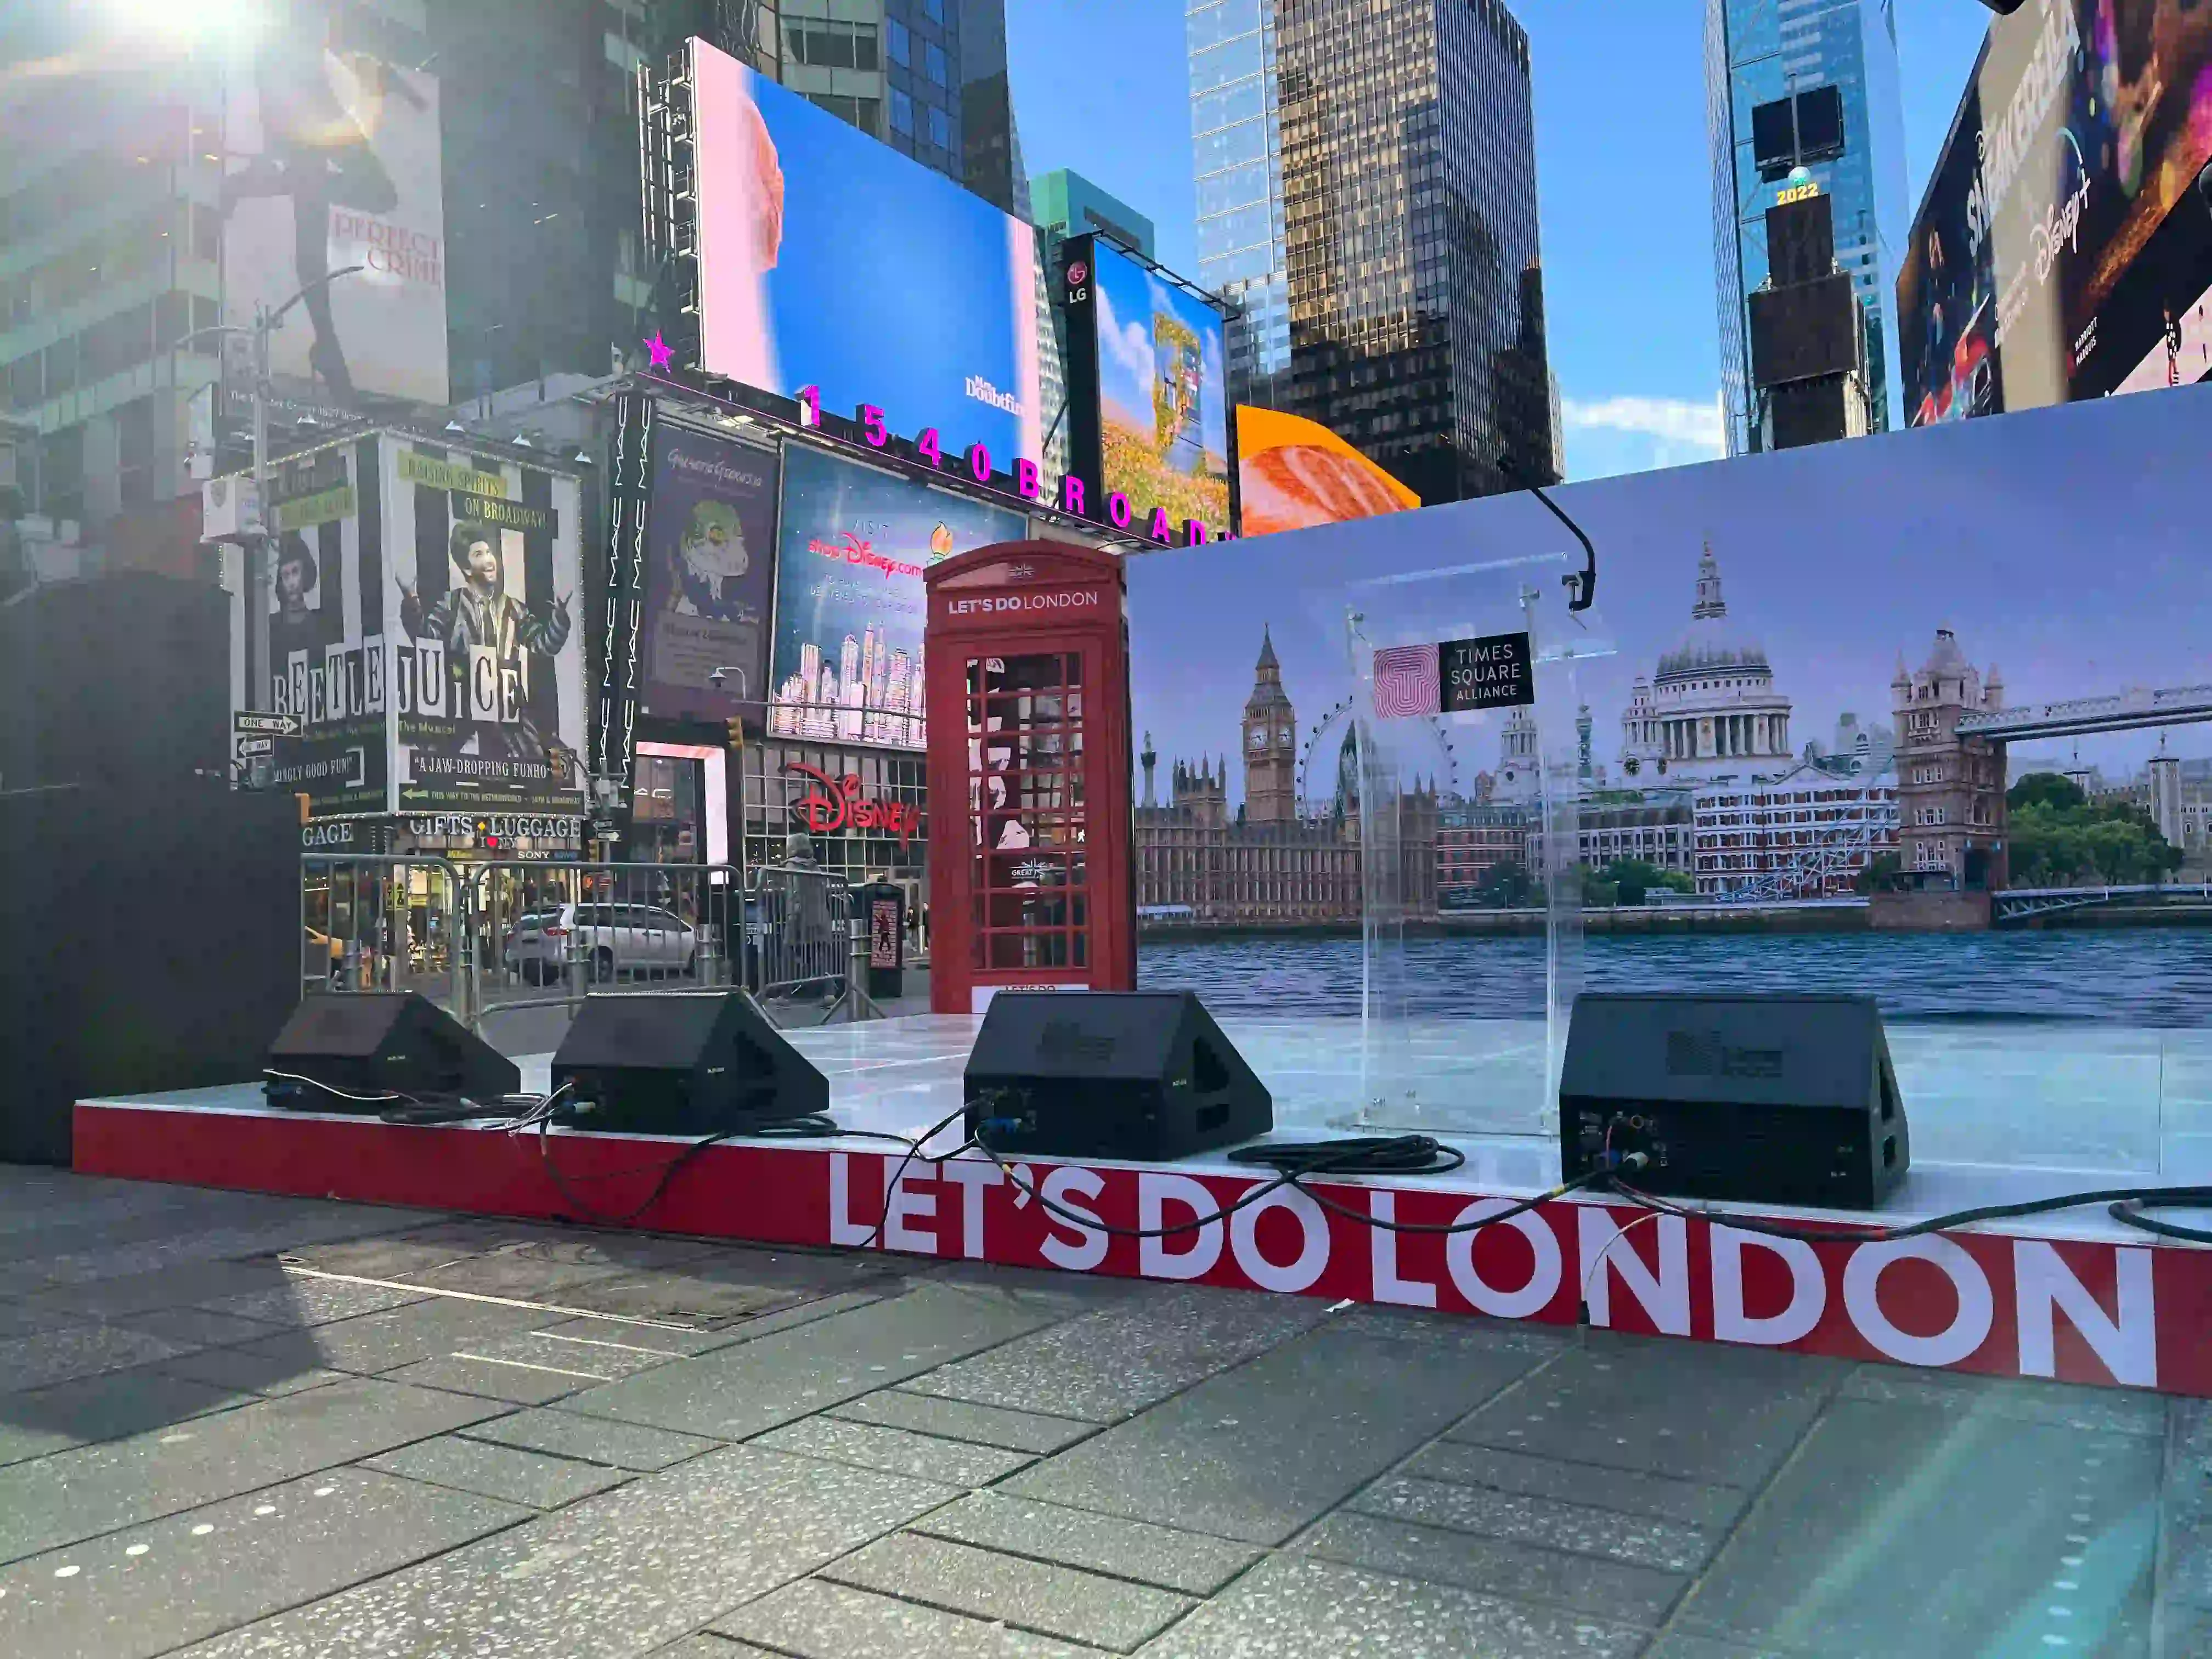 Lets do London sign in times square with red telephone box for experiential event.